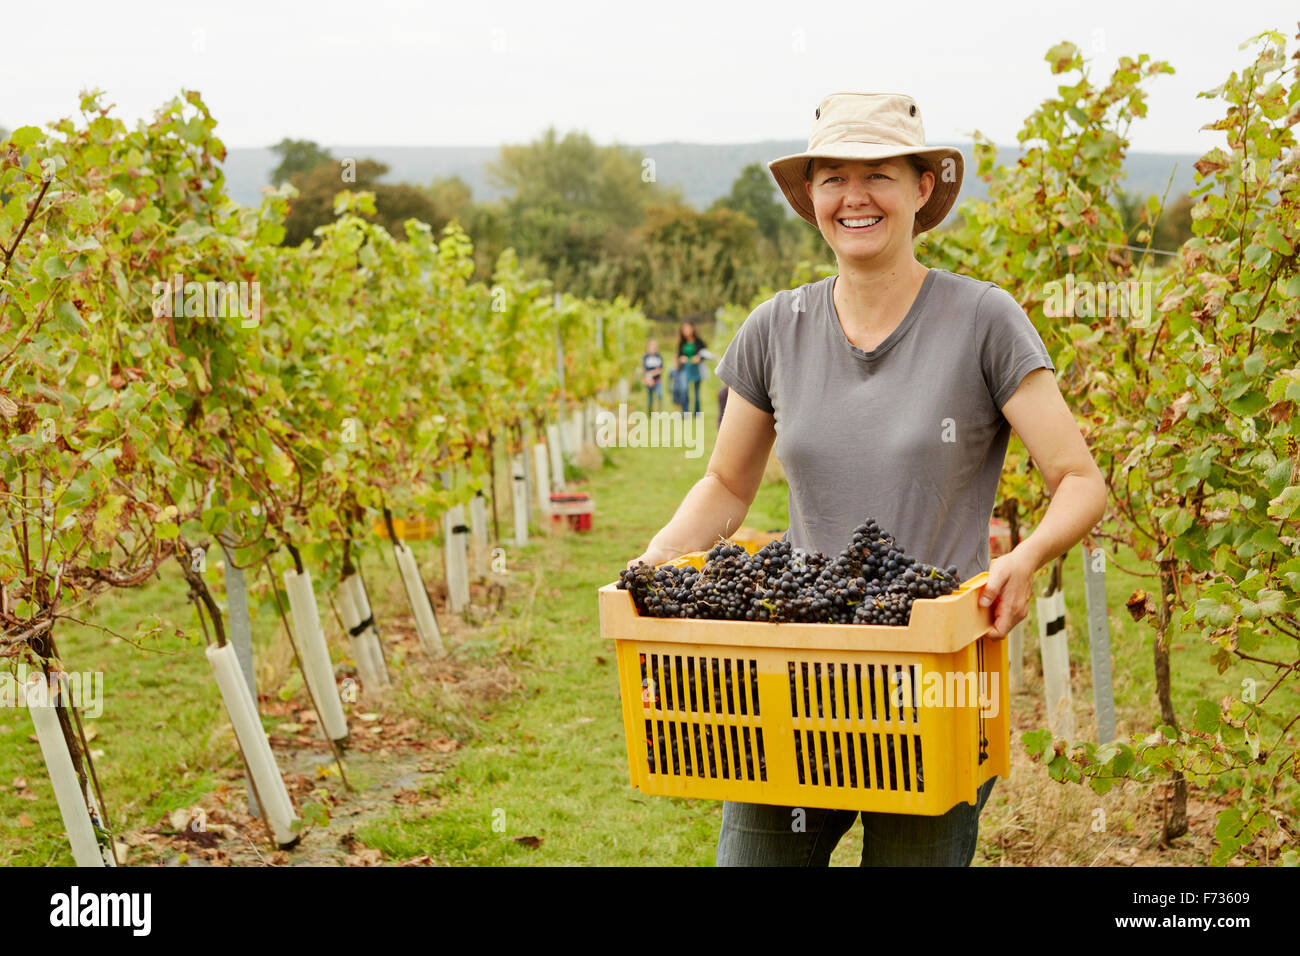 A grape picker in a wide brimmed hat, carrying a plastic crate of picked red grapes Stock Photo